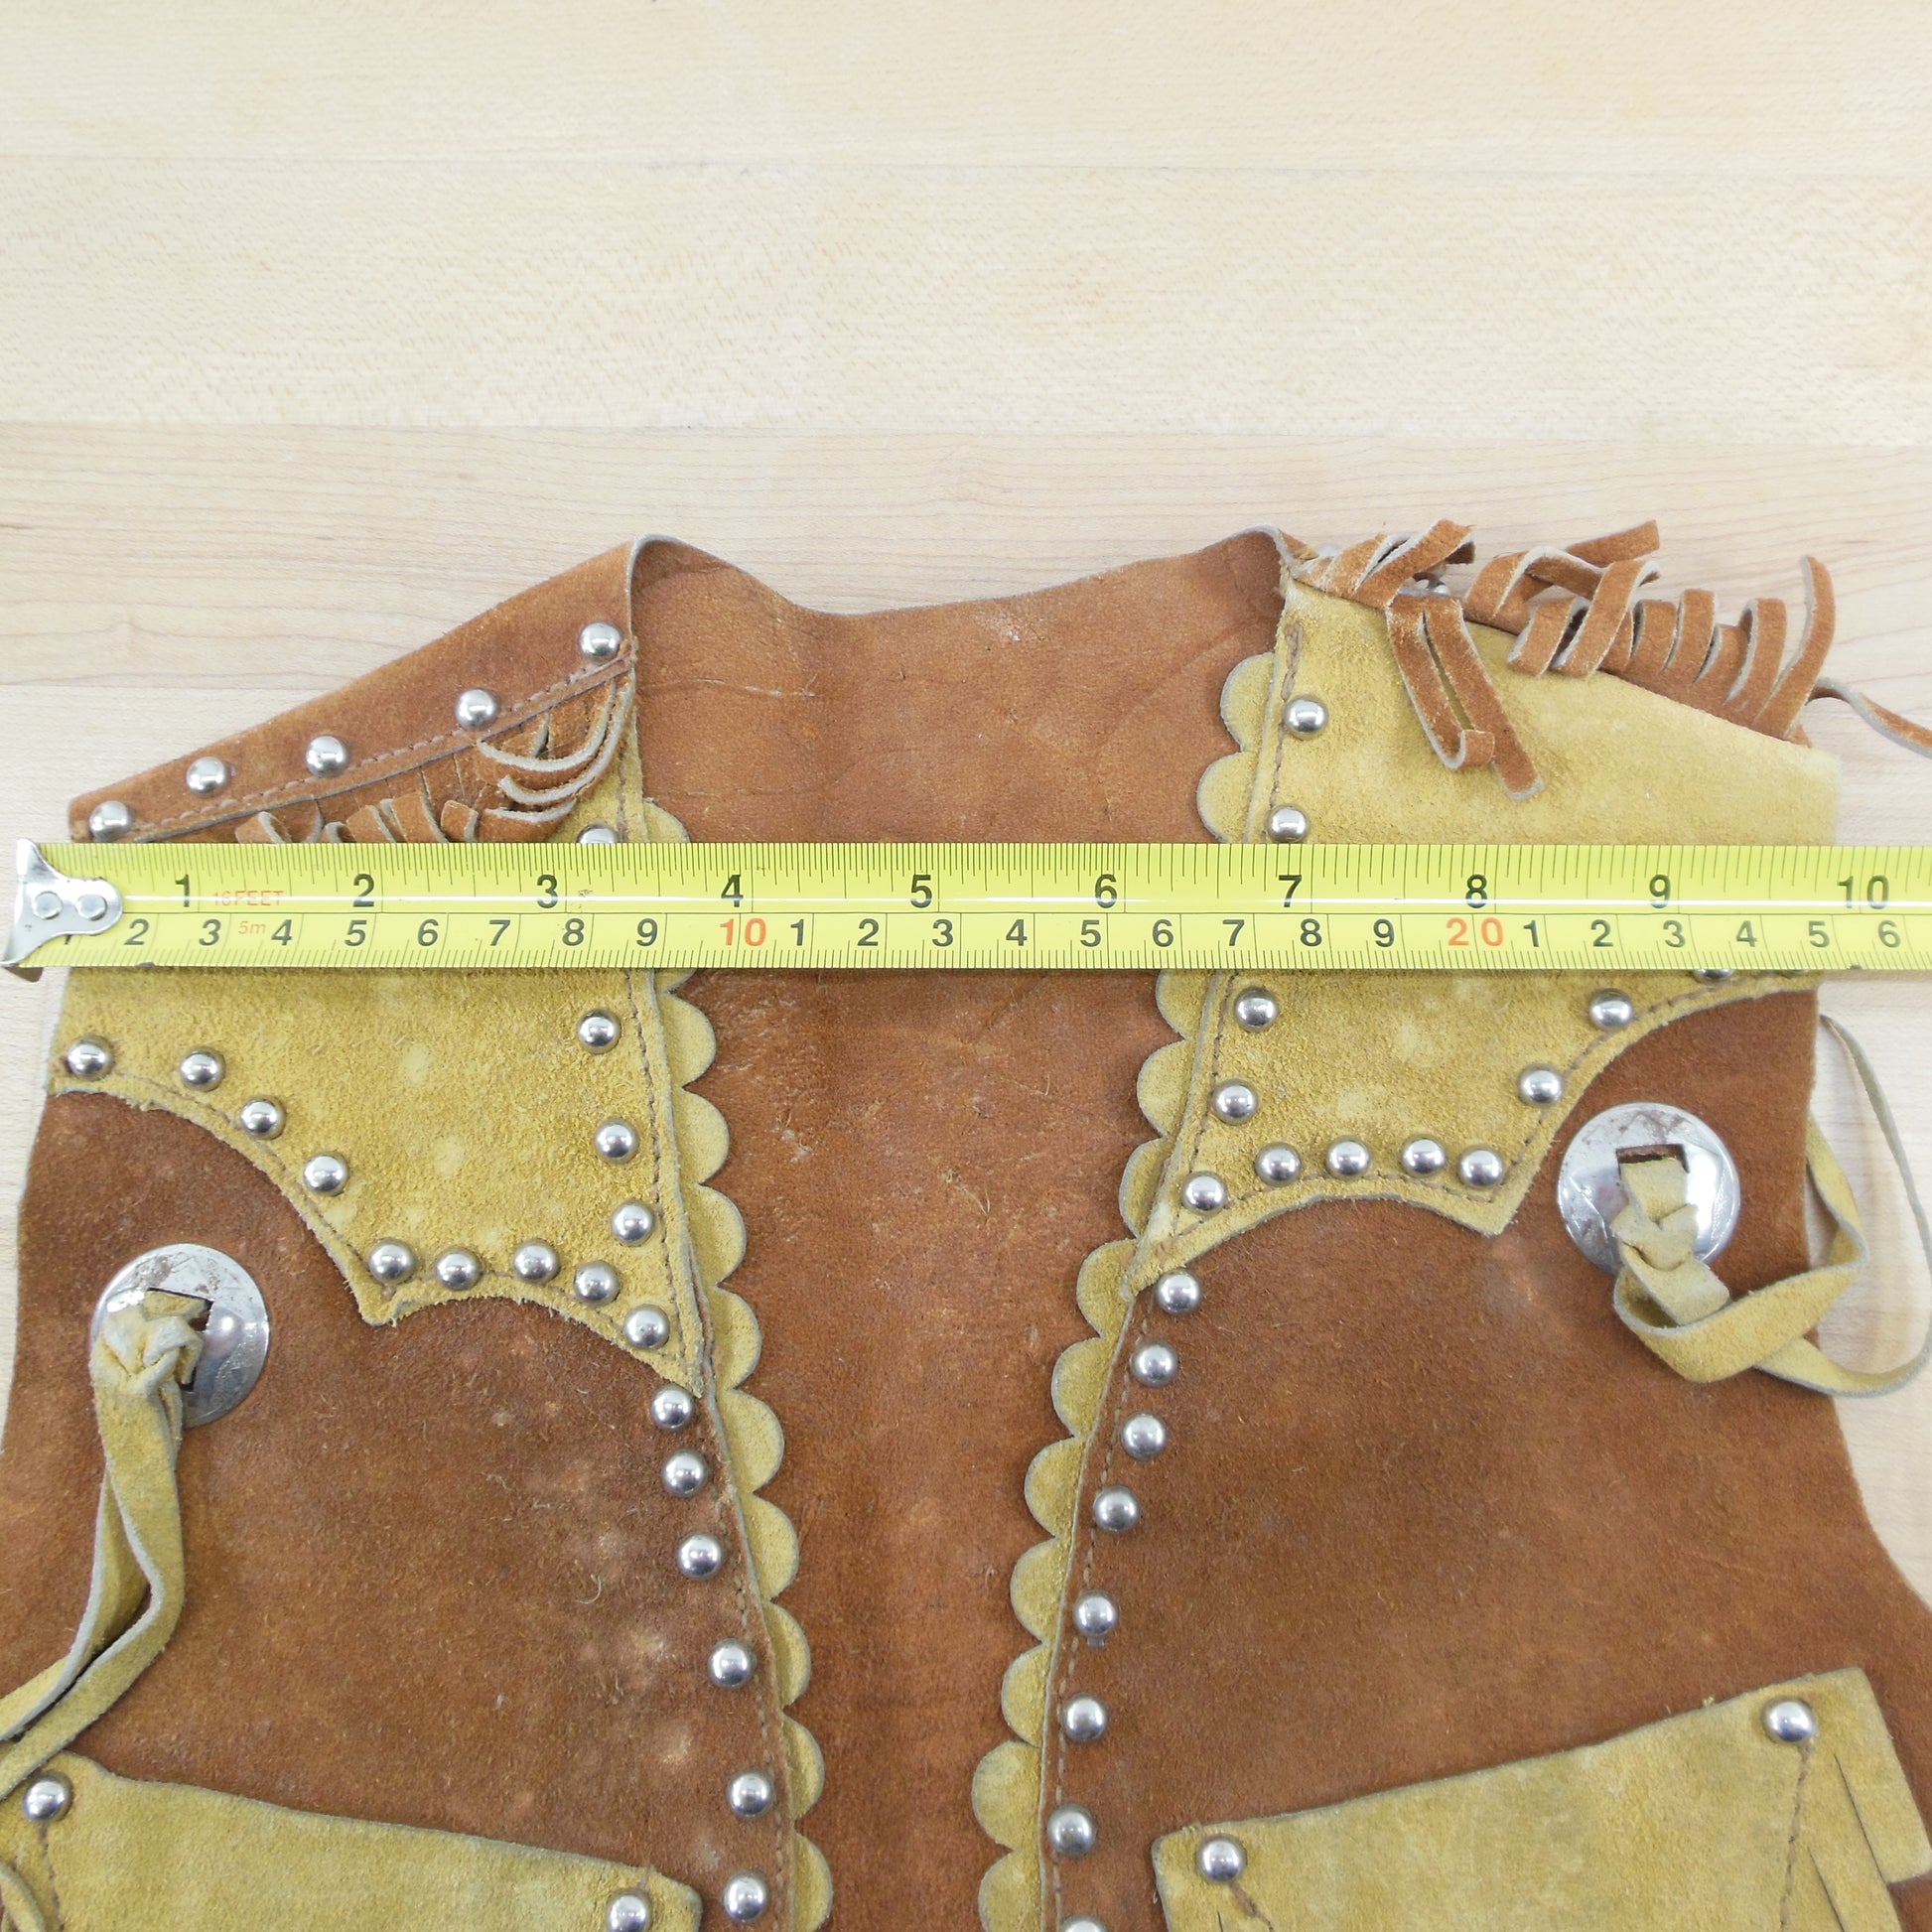 Schoellkopf Co. Dallas 1950's Leather Child Cowgirl Outfit Vest Skirt width